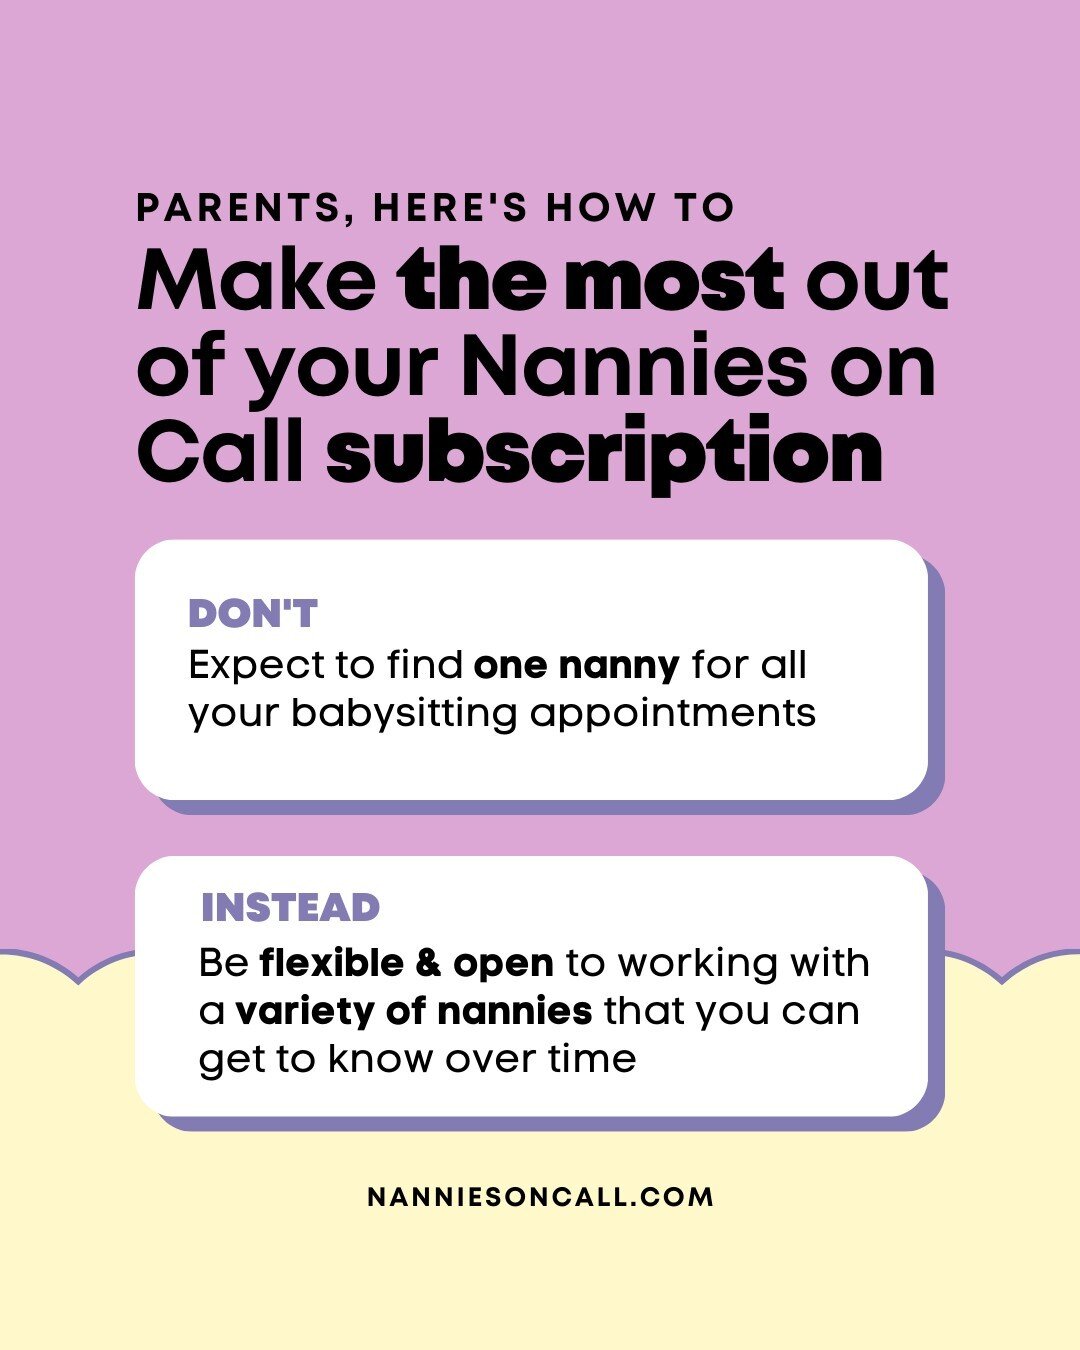 Hey parents, did you know that many occasional nannies on the Nannies on Call platform often have other jobs or are studying and they only work as nannies from time to time to make some extra cash?⁠
⁠
Usually, an occasional nanny won't be available f